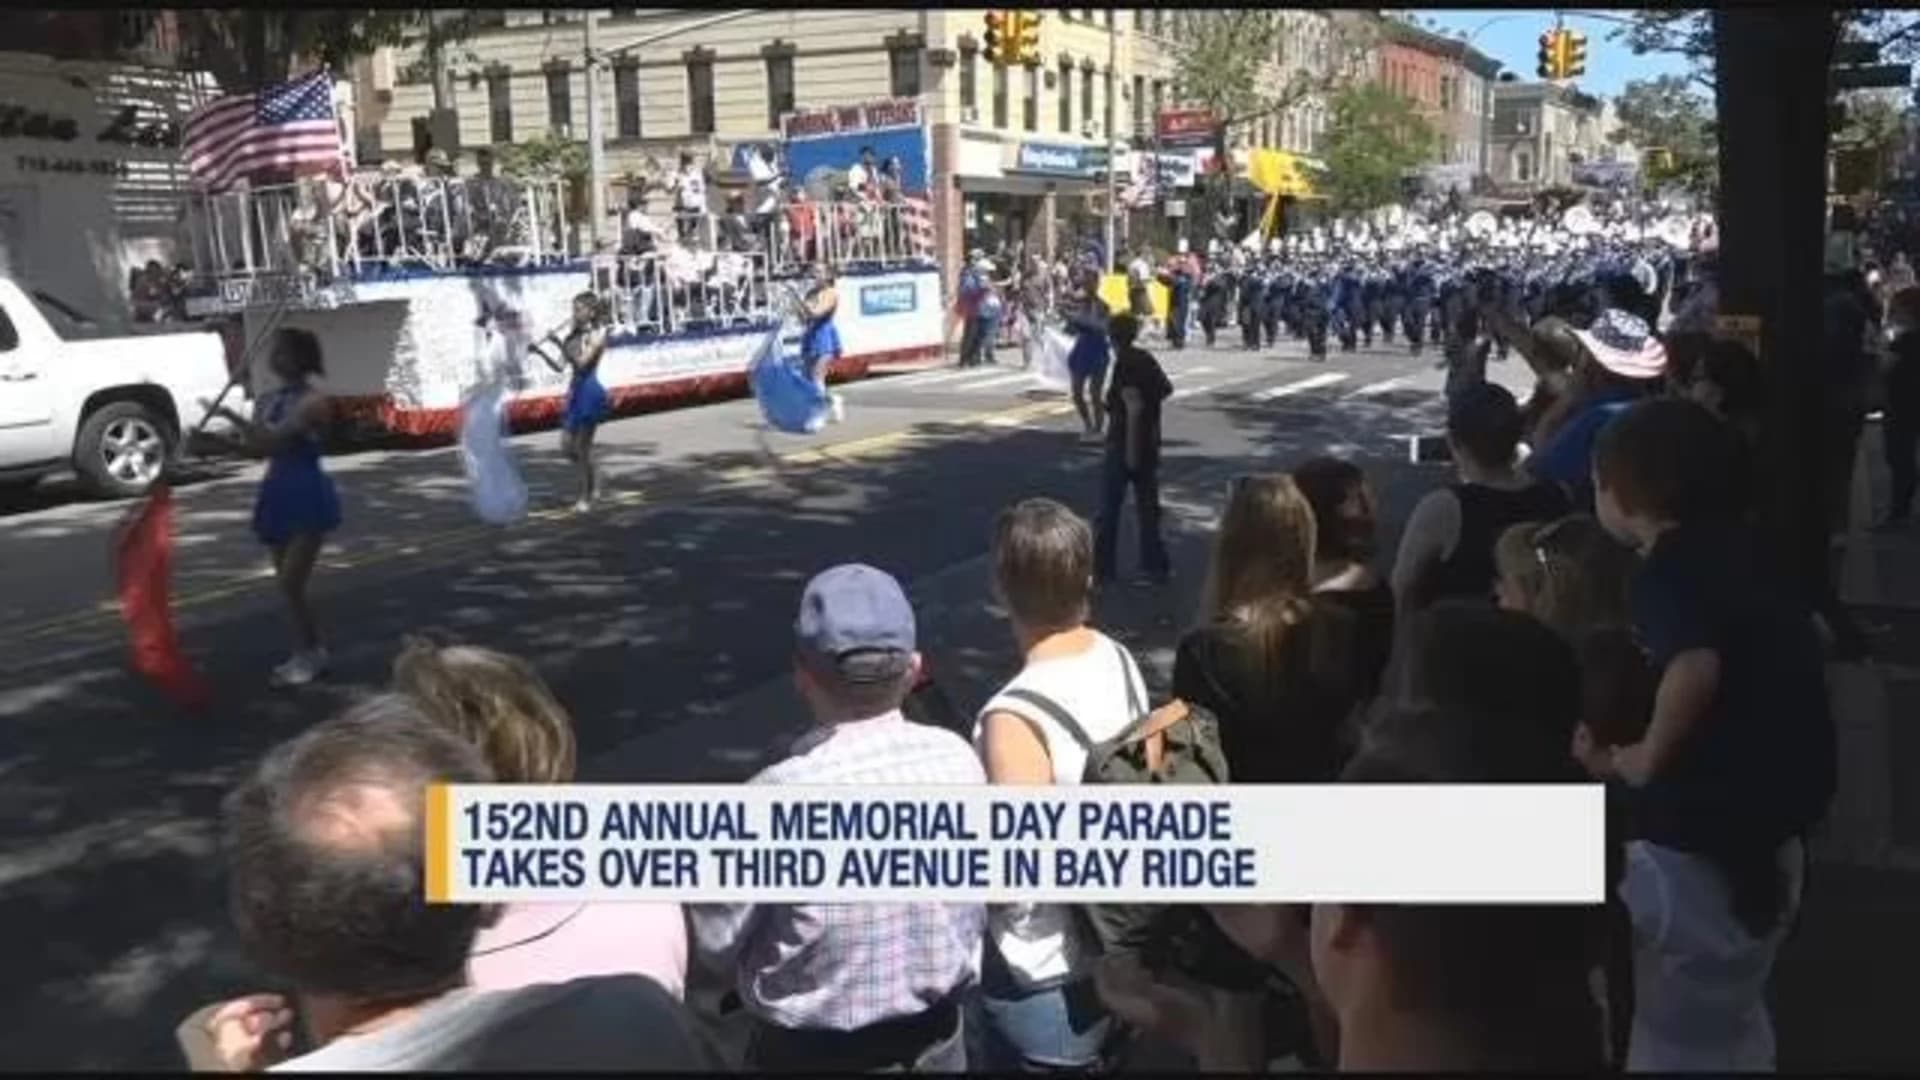 Hundreds gather for 152nd Memorial Day Parade in Bay Ridge